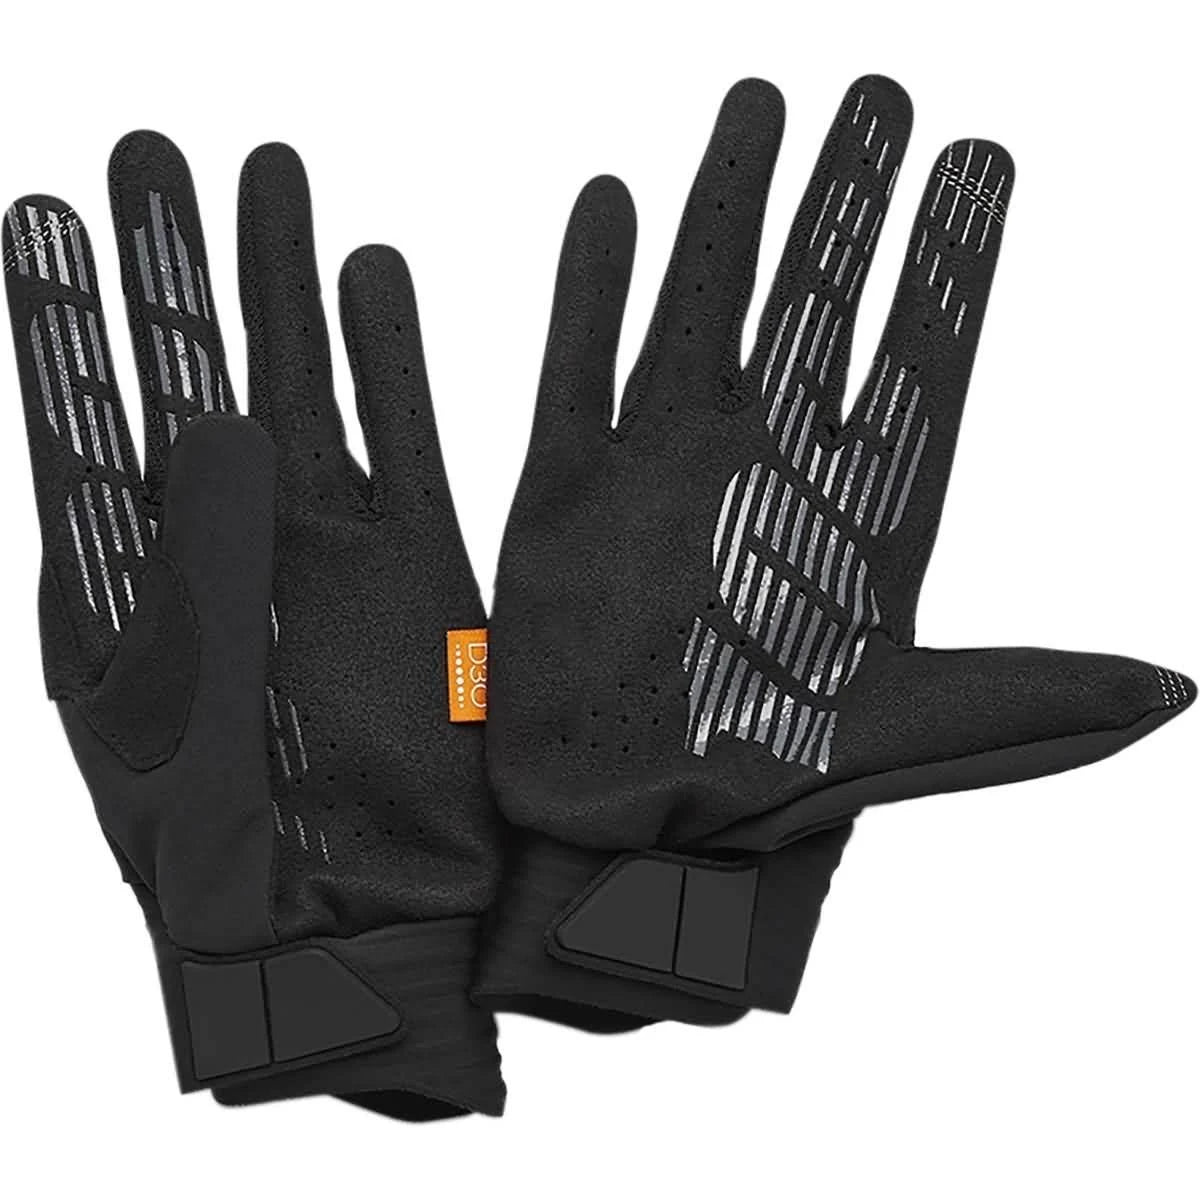 Cognito bike glove, grip on palm, black and army green